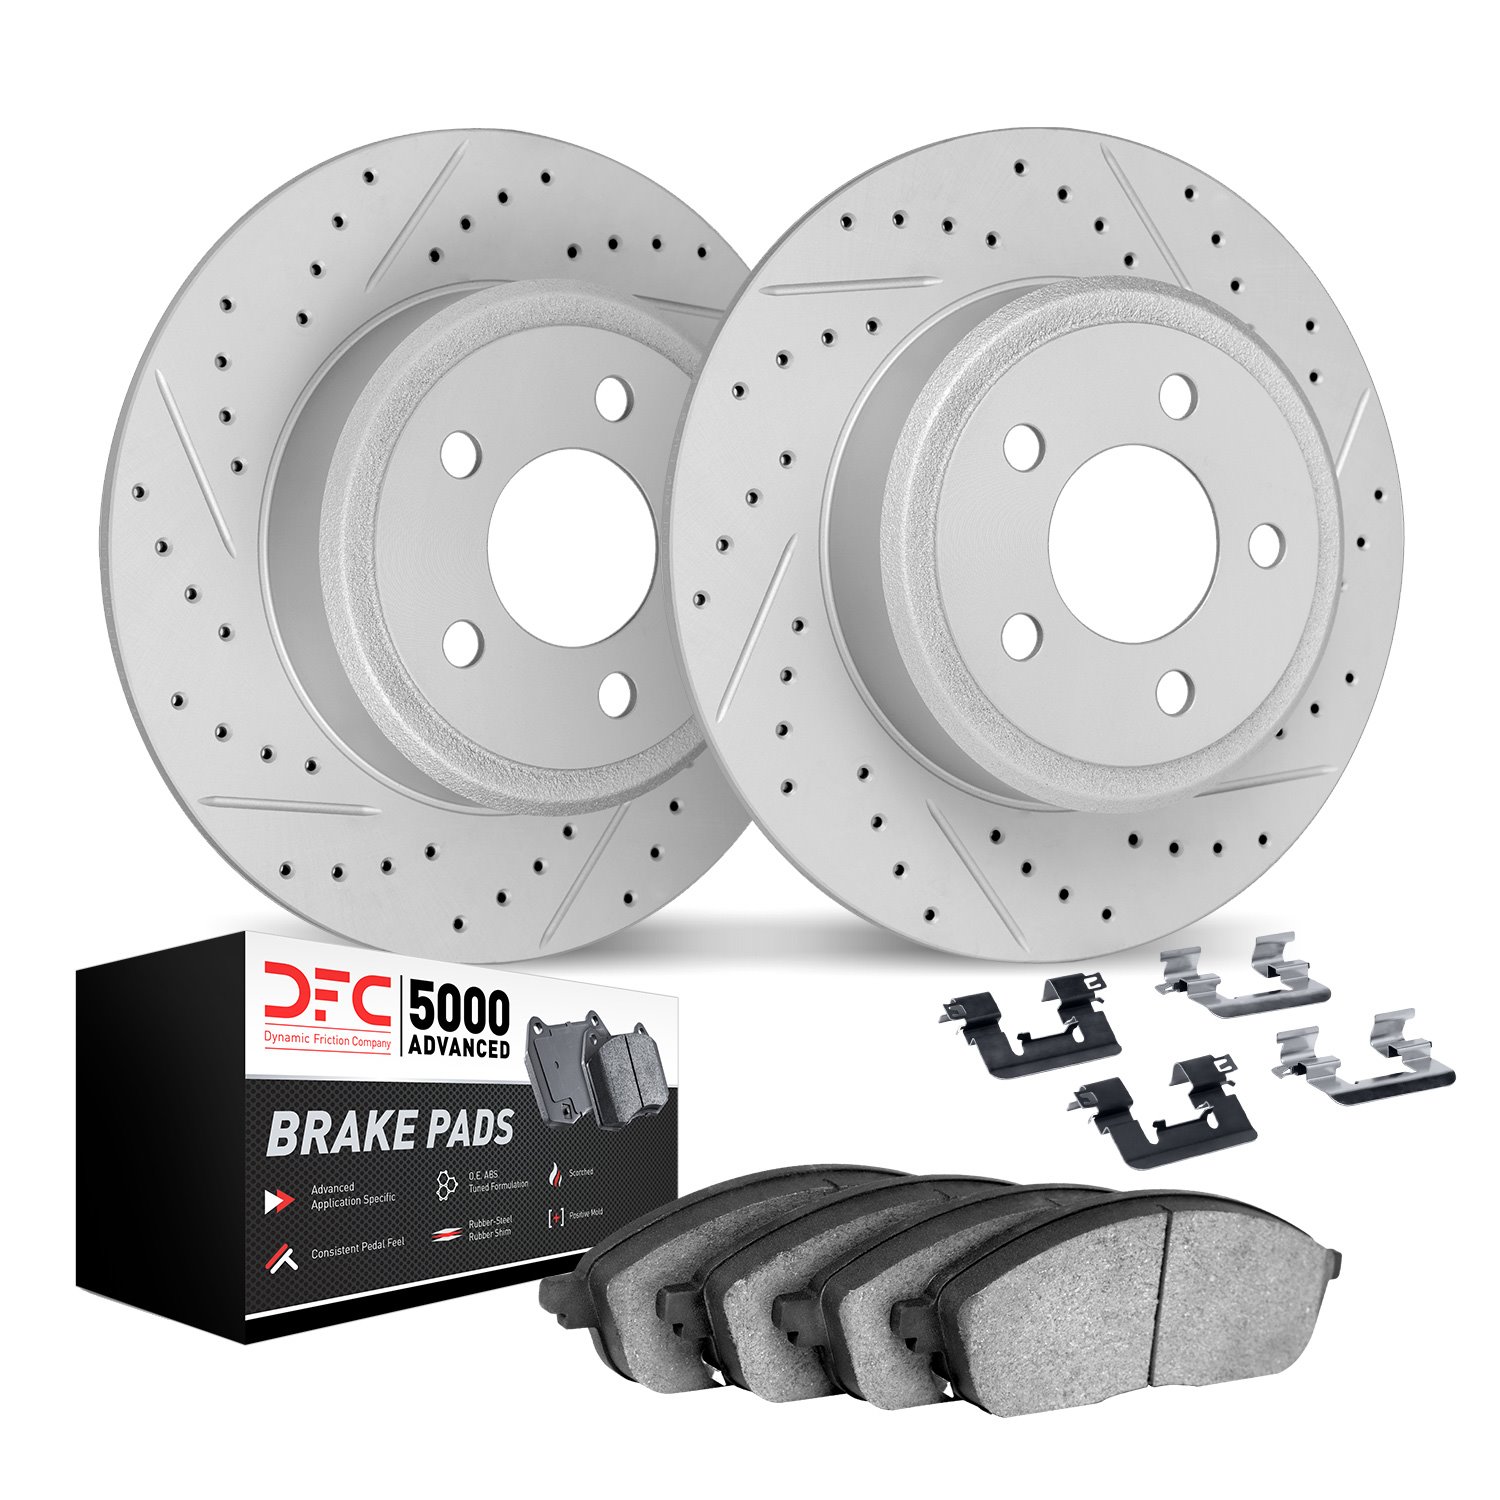 2512-63025 Geoperformance Drilled/Slotted Rotors w/5000 Advanced Brake Pads Kit & Hardware, 2009-2013 Mercedes-Benz, Position: R